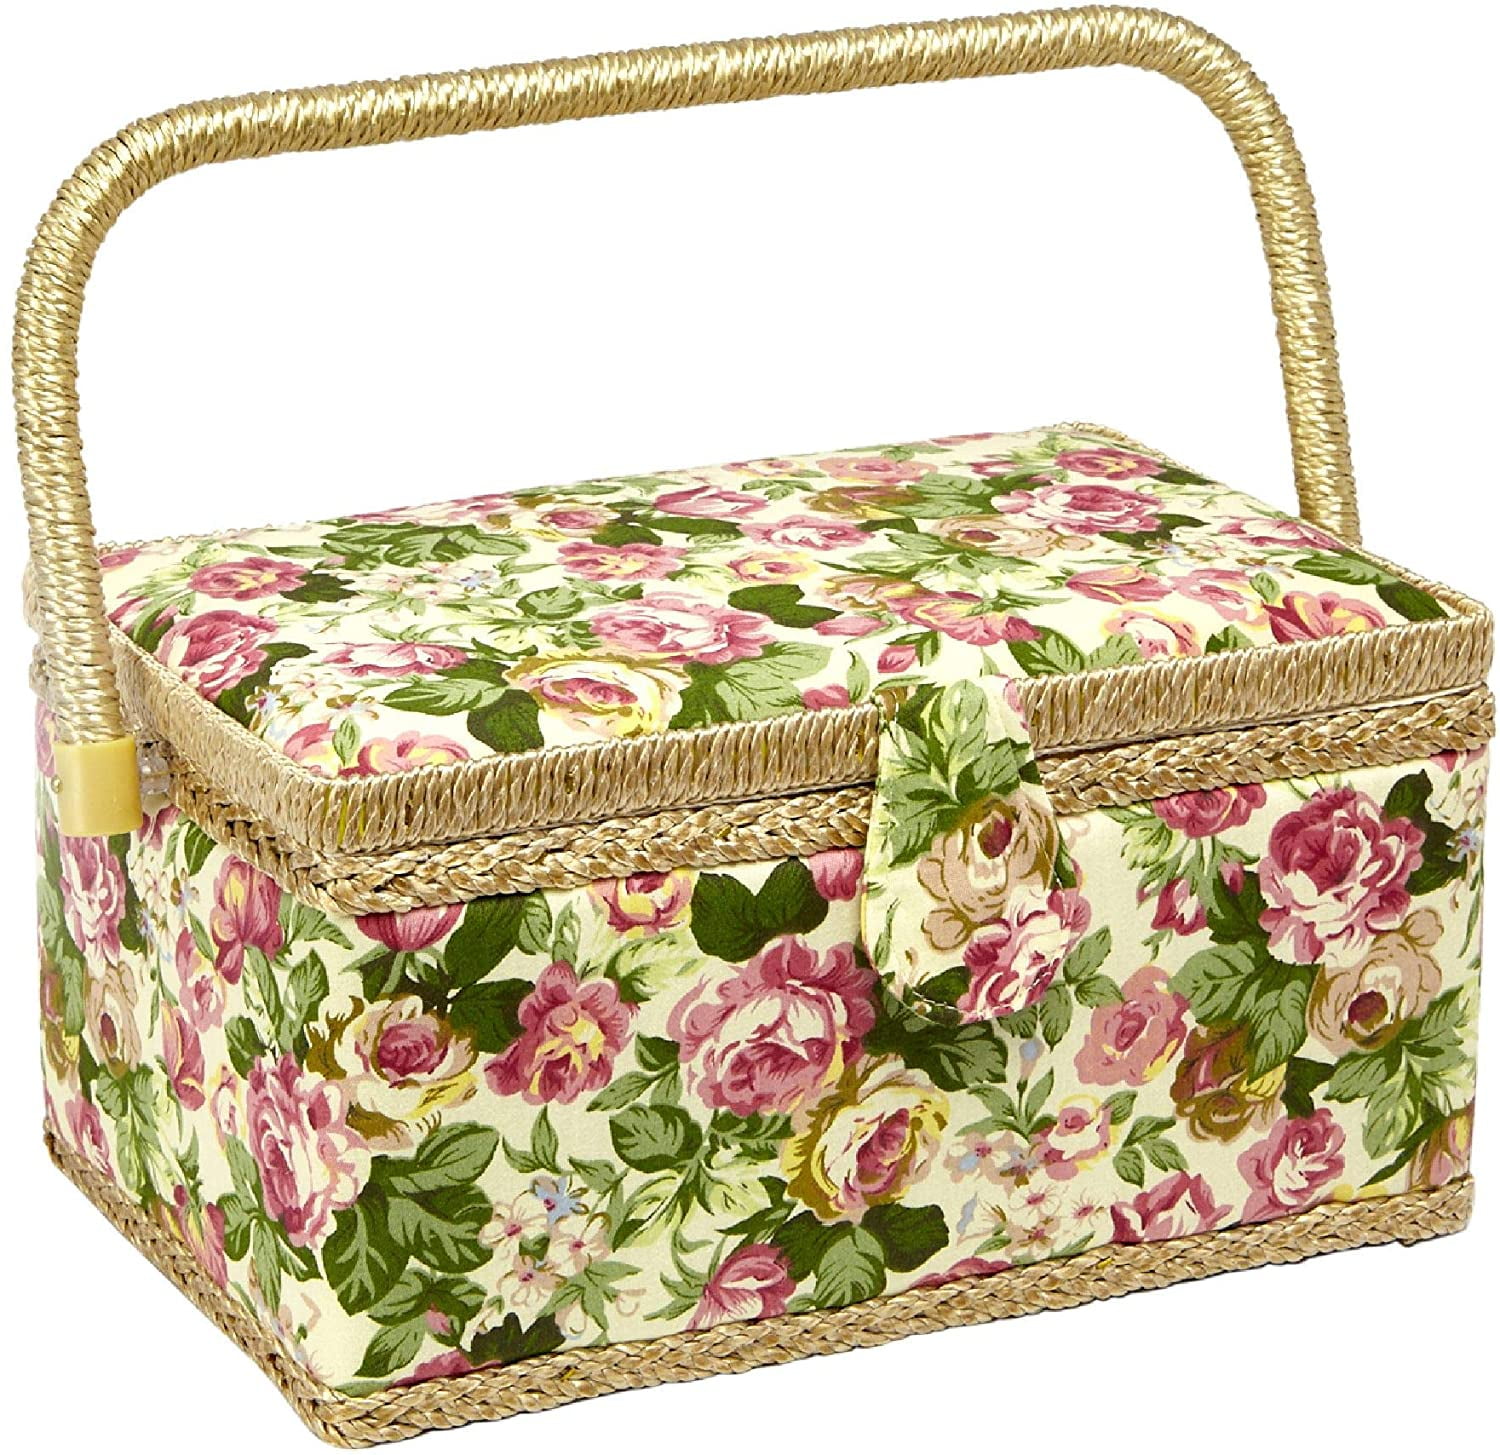 Sewing Kit Storage Box with Remova Sewing Basket with Tulip Floral Print Design 